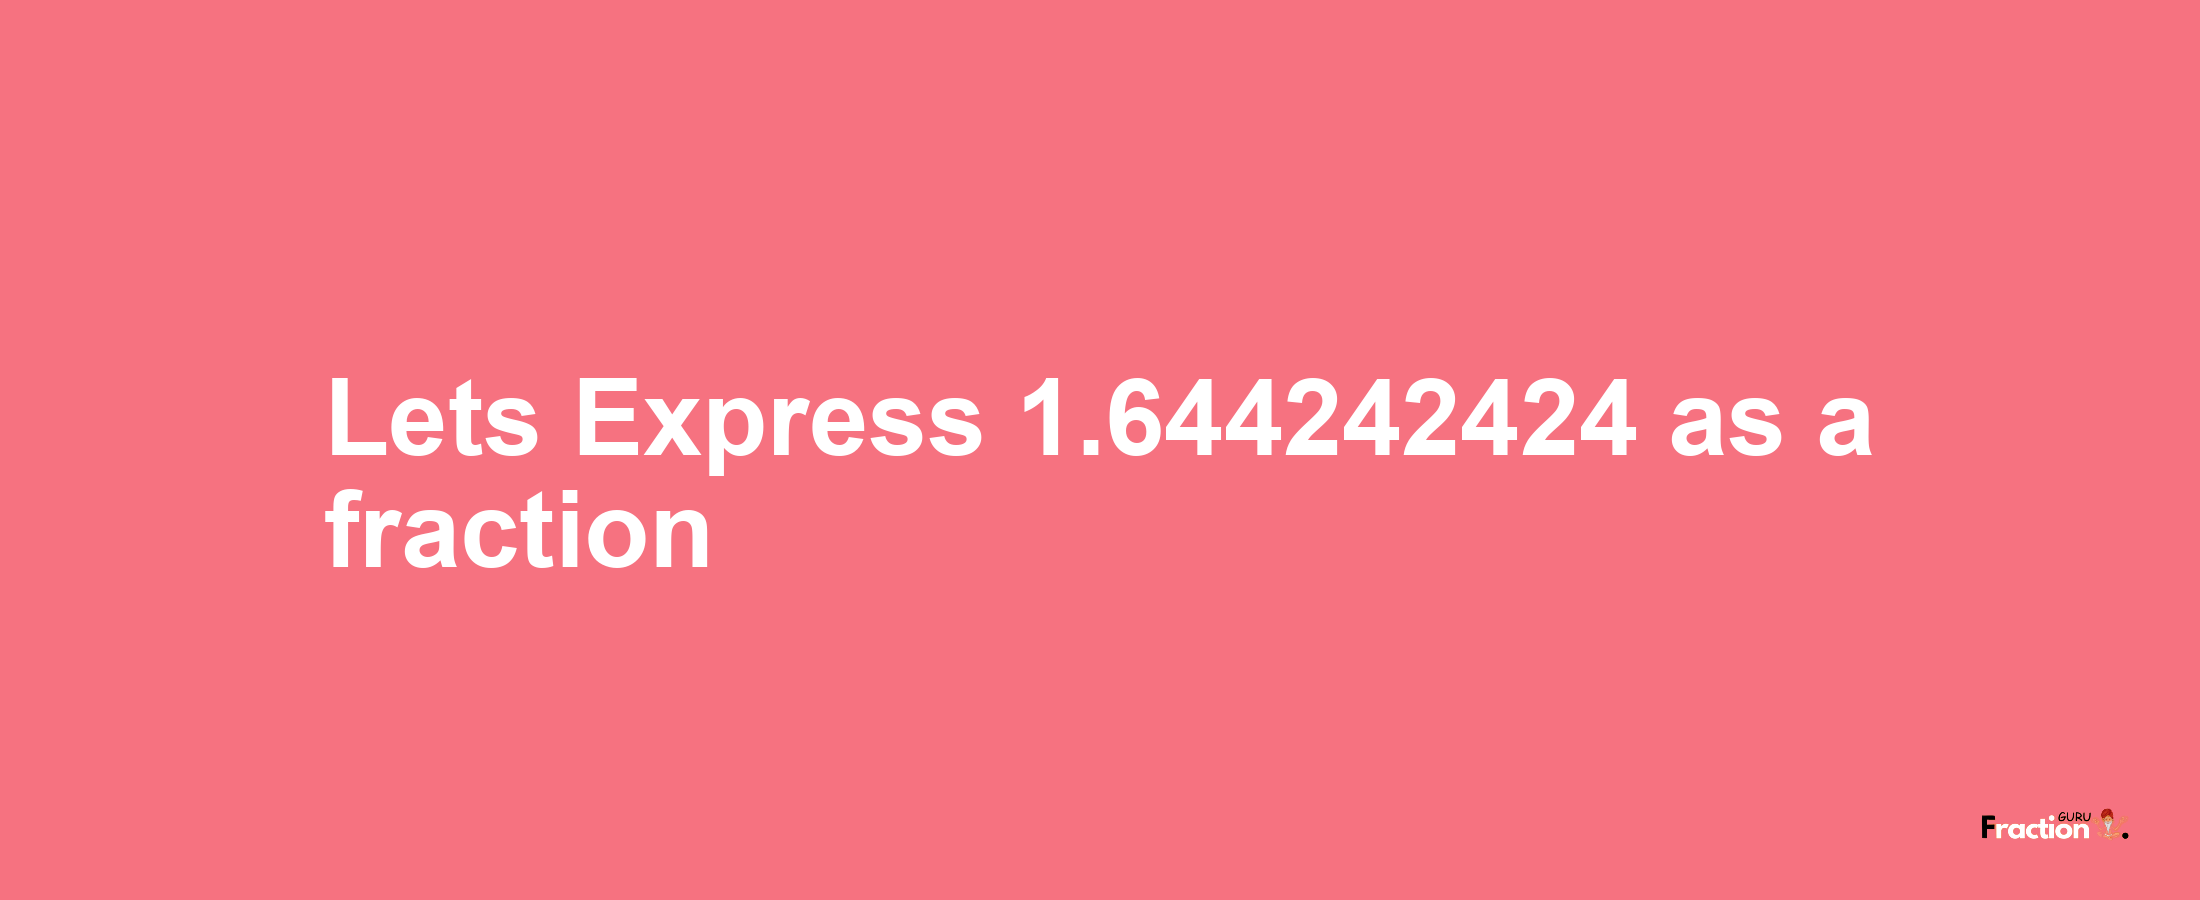 Lets Express 1.644242424 as afraction